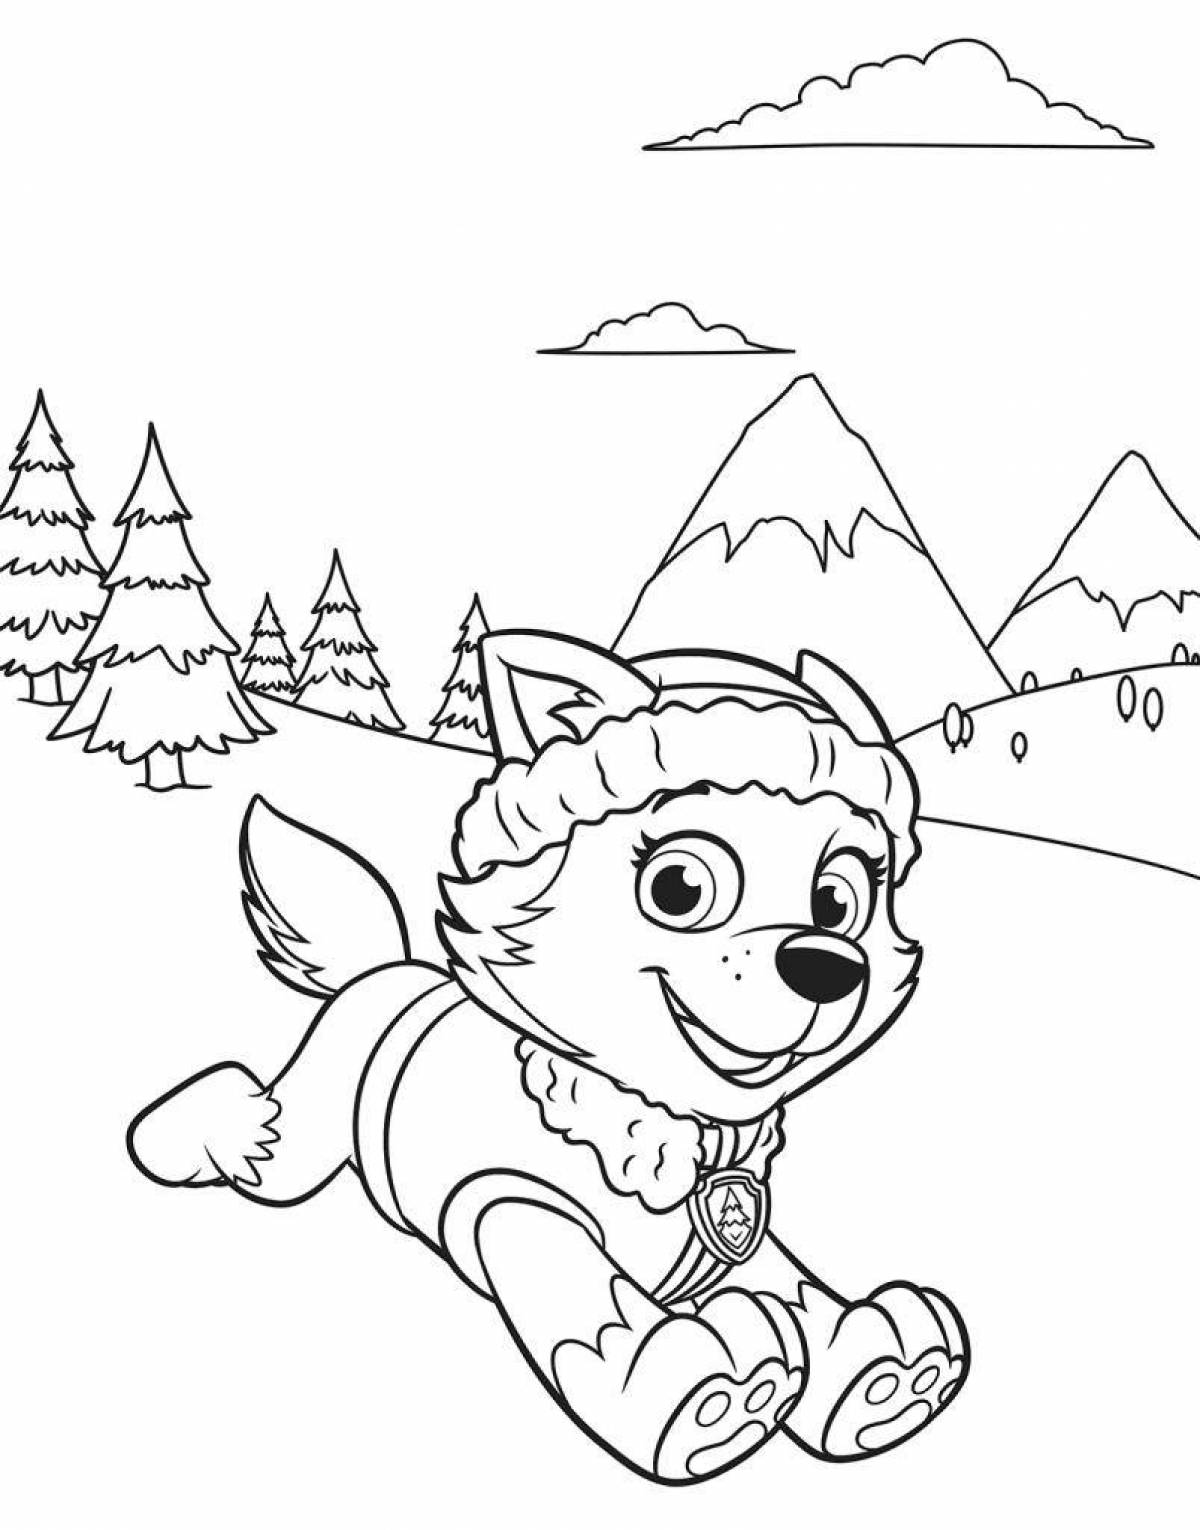 Animated coloring page paw patrol sky and everest